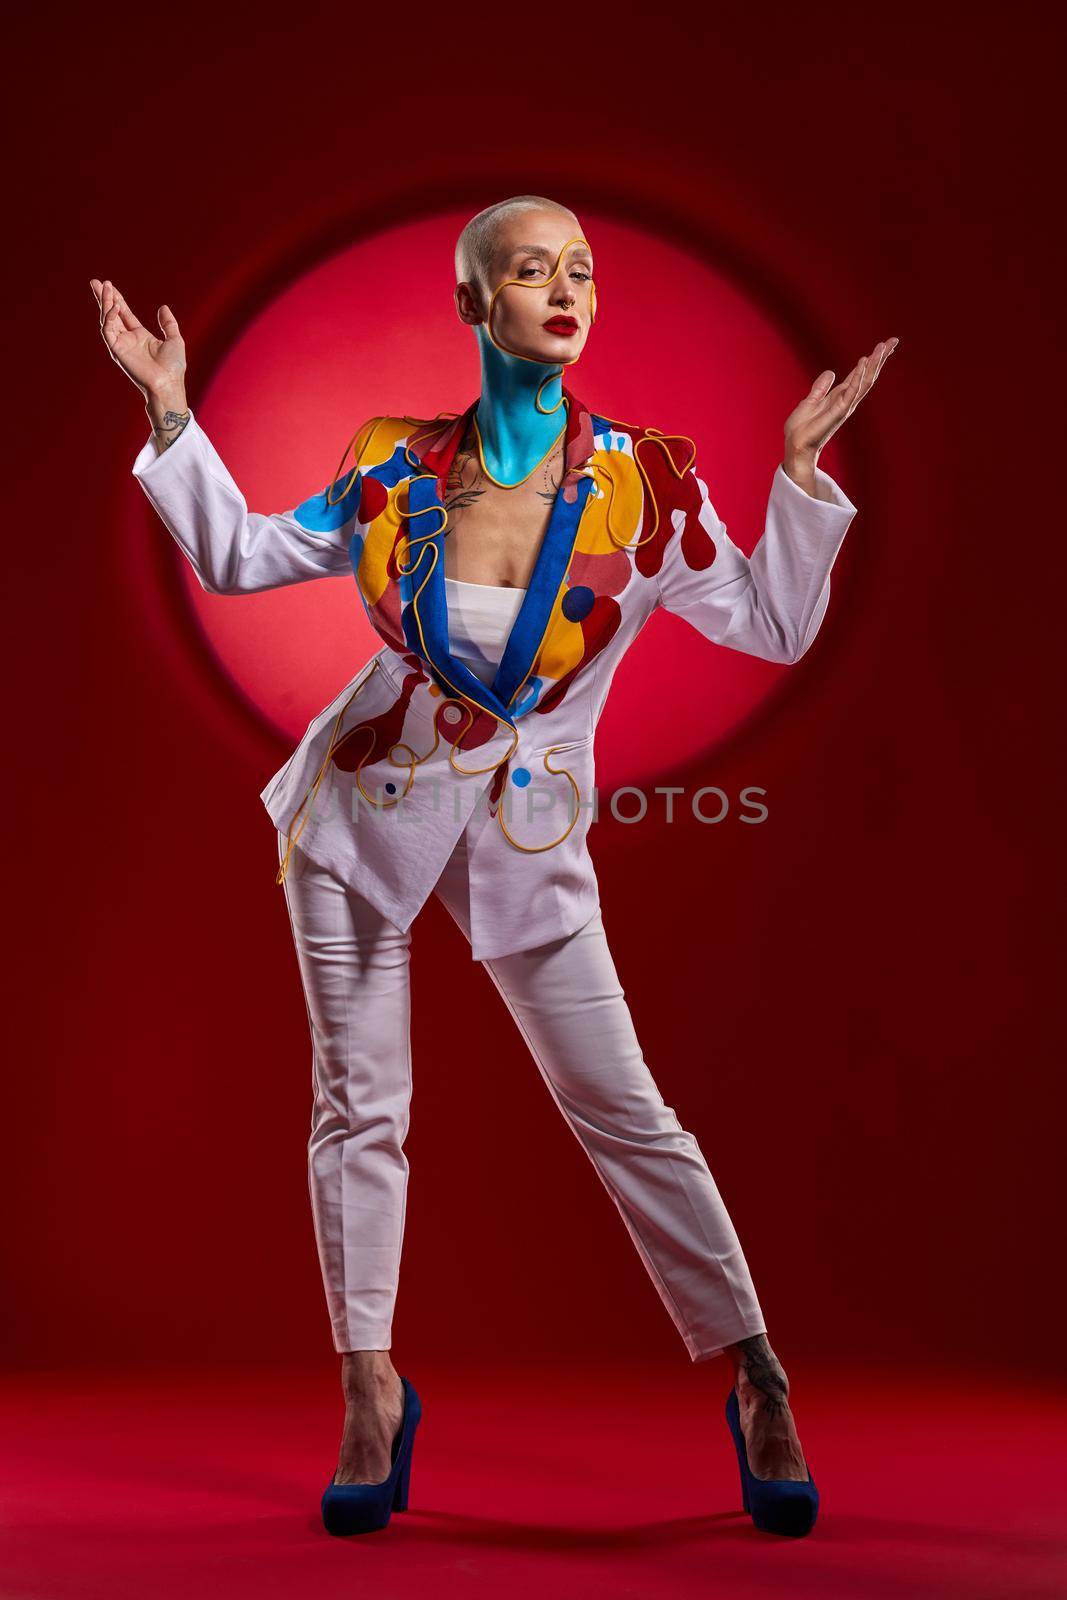 Behold the Queen of the palace. Studio shot of a stylish young woman posing against a red background